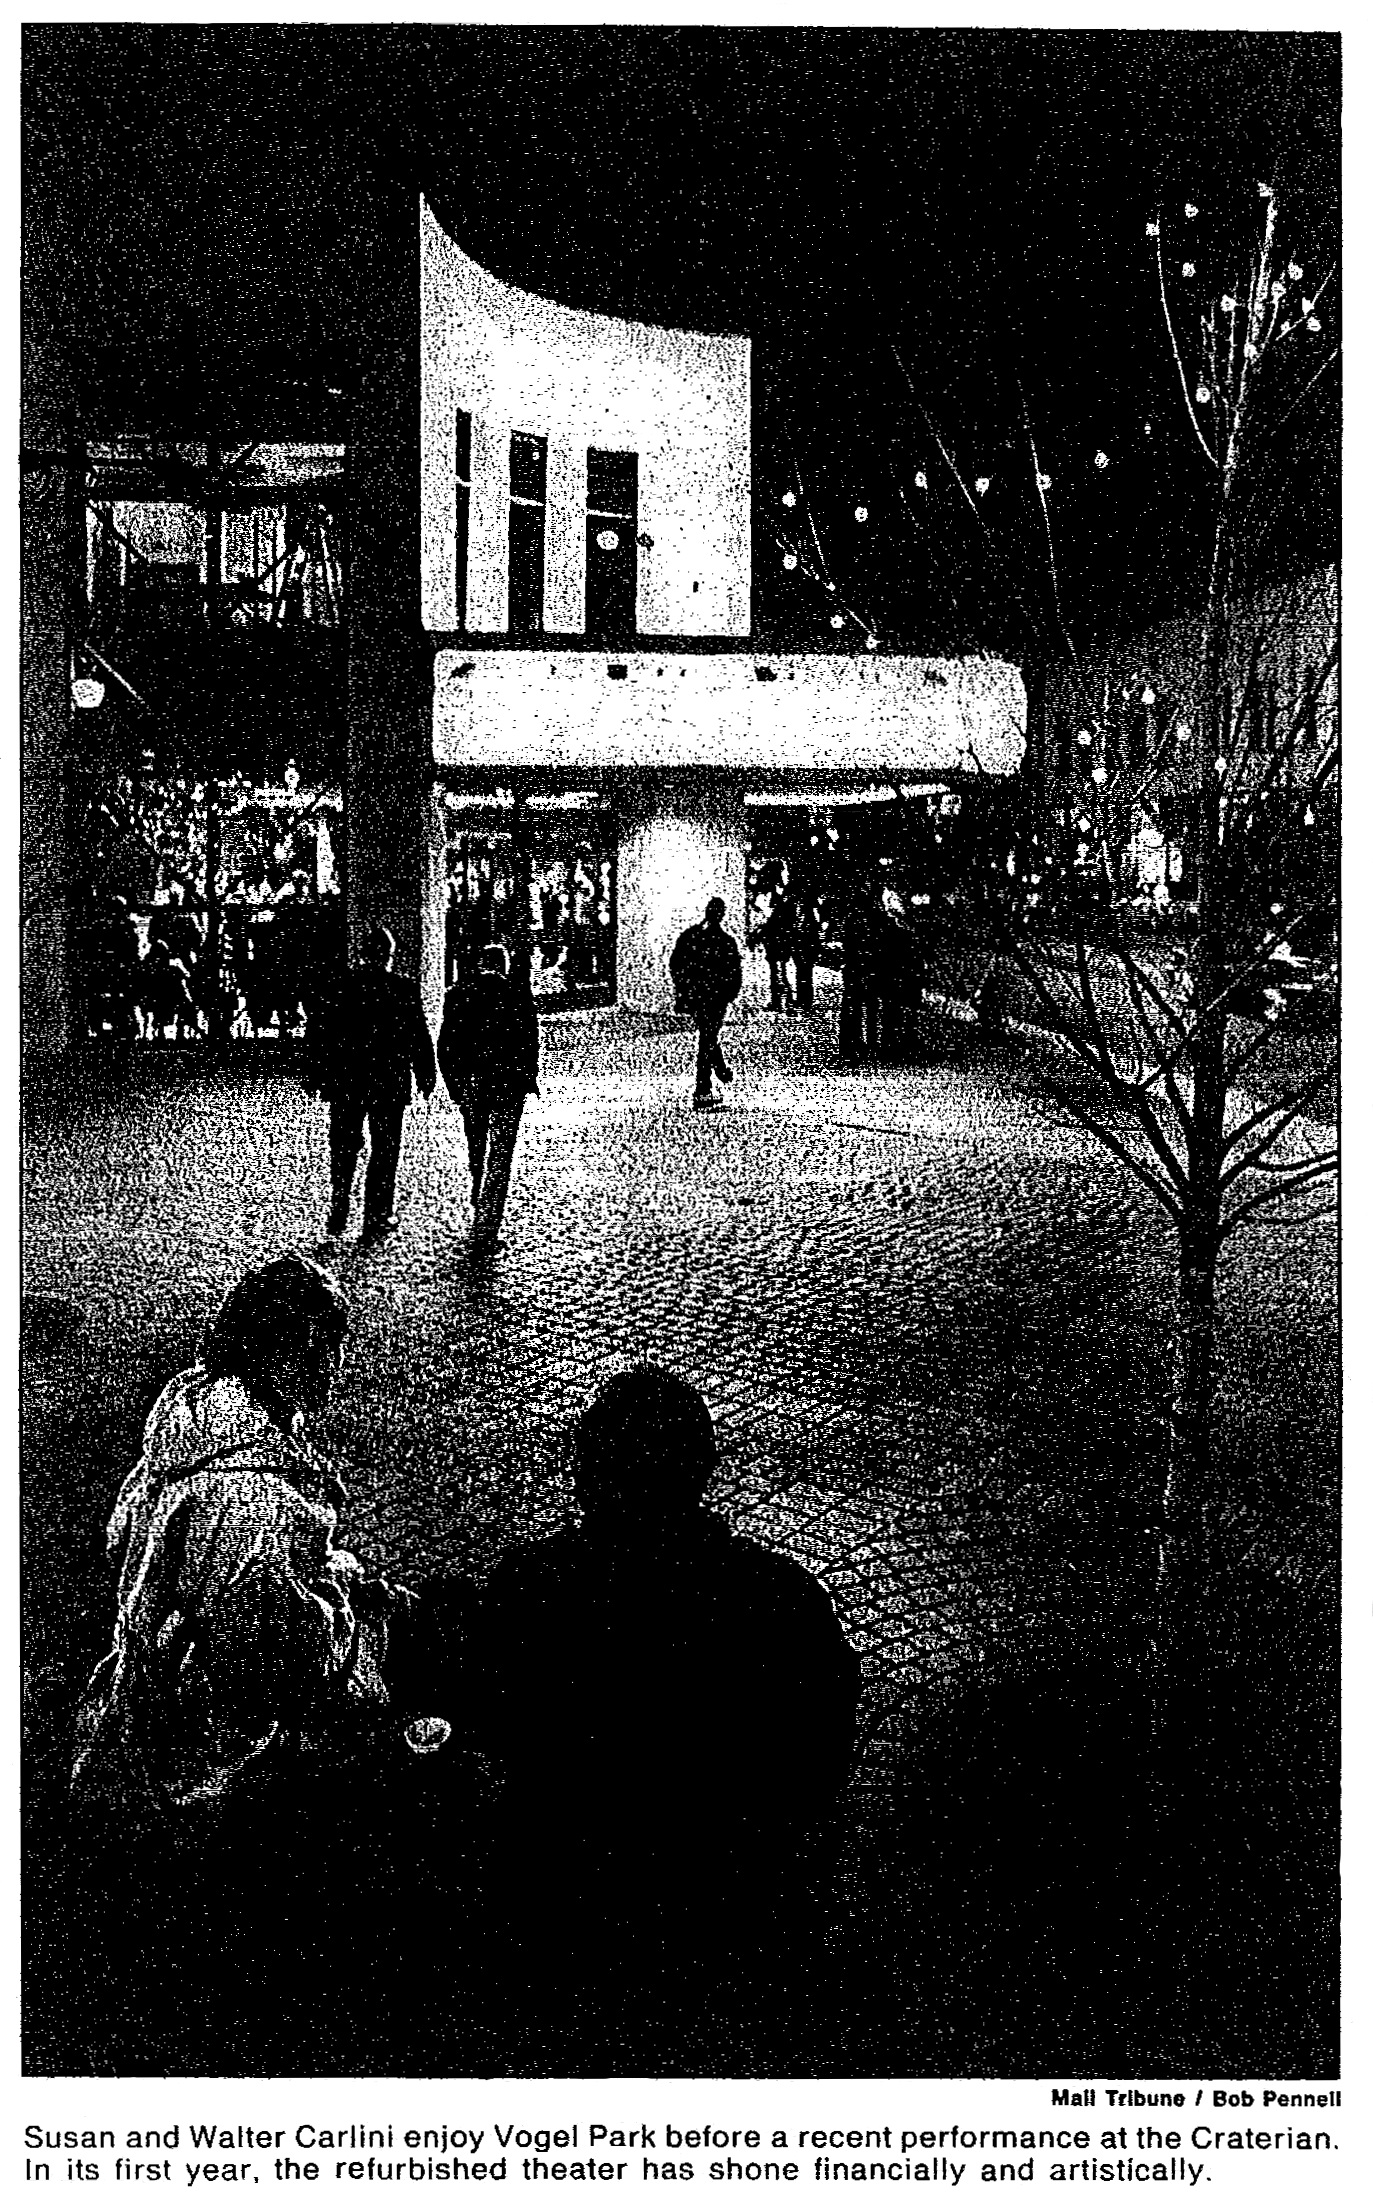 Craterian Theater, March 1, 1998 Medford Mail Tribune